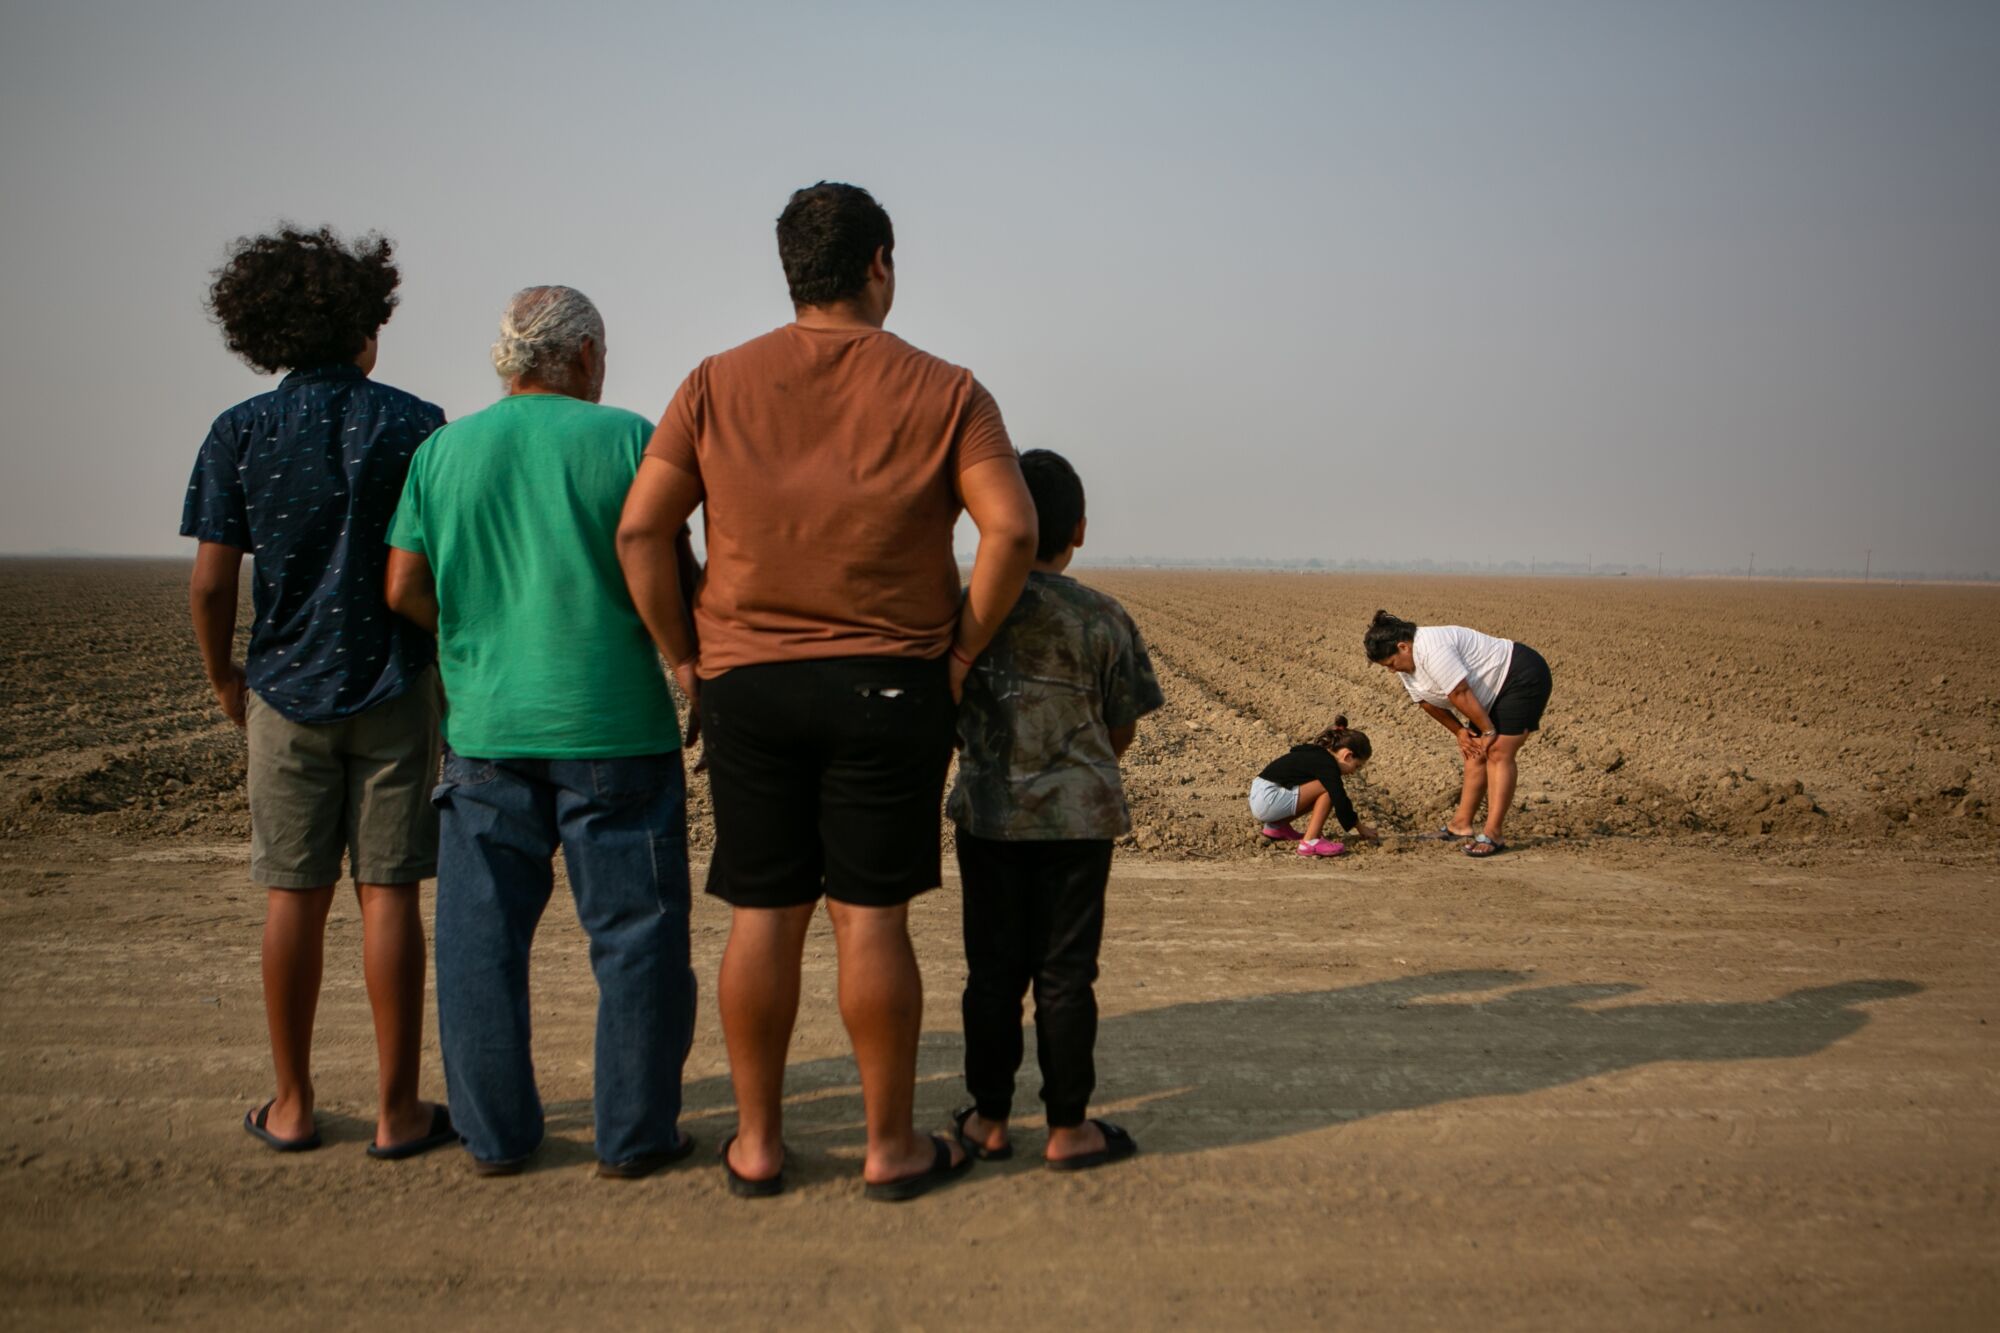 The family watches as a girl plays in a field